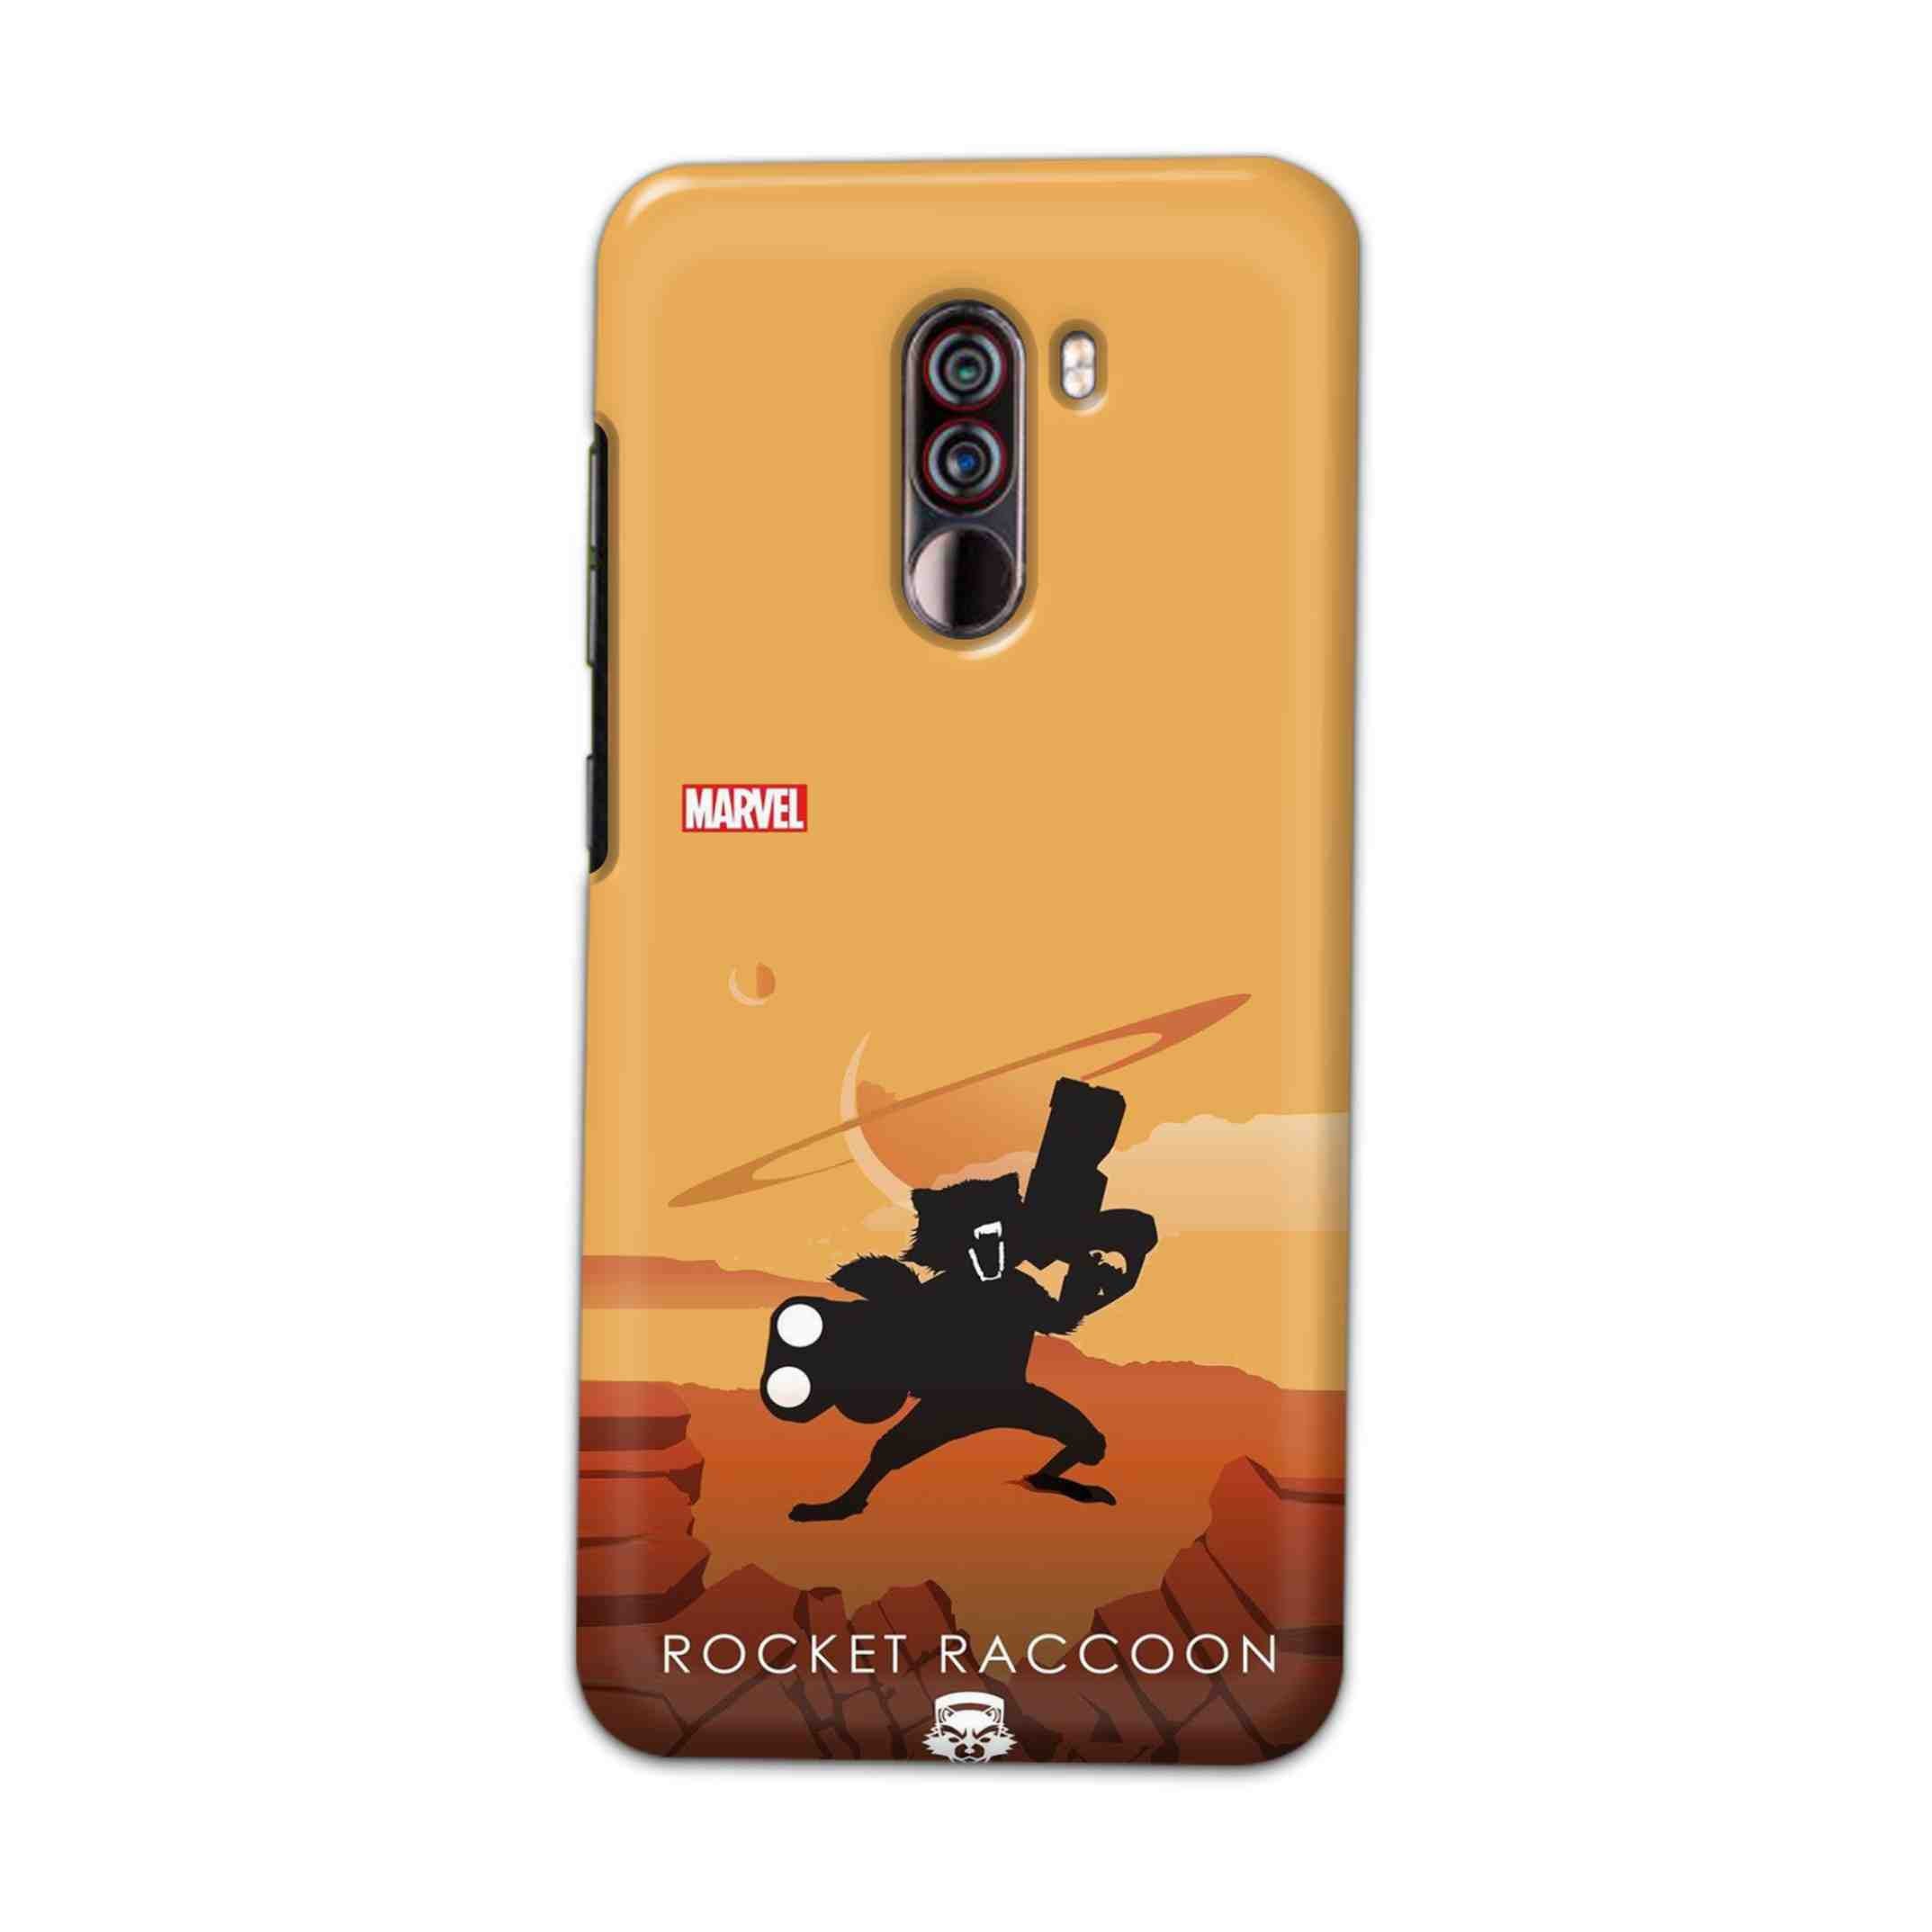 Buy Rocket Raccoon Hard Back Mobile Phone Case Cover For Xiaomi Pocophone F1 Online